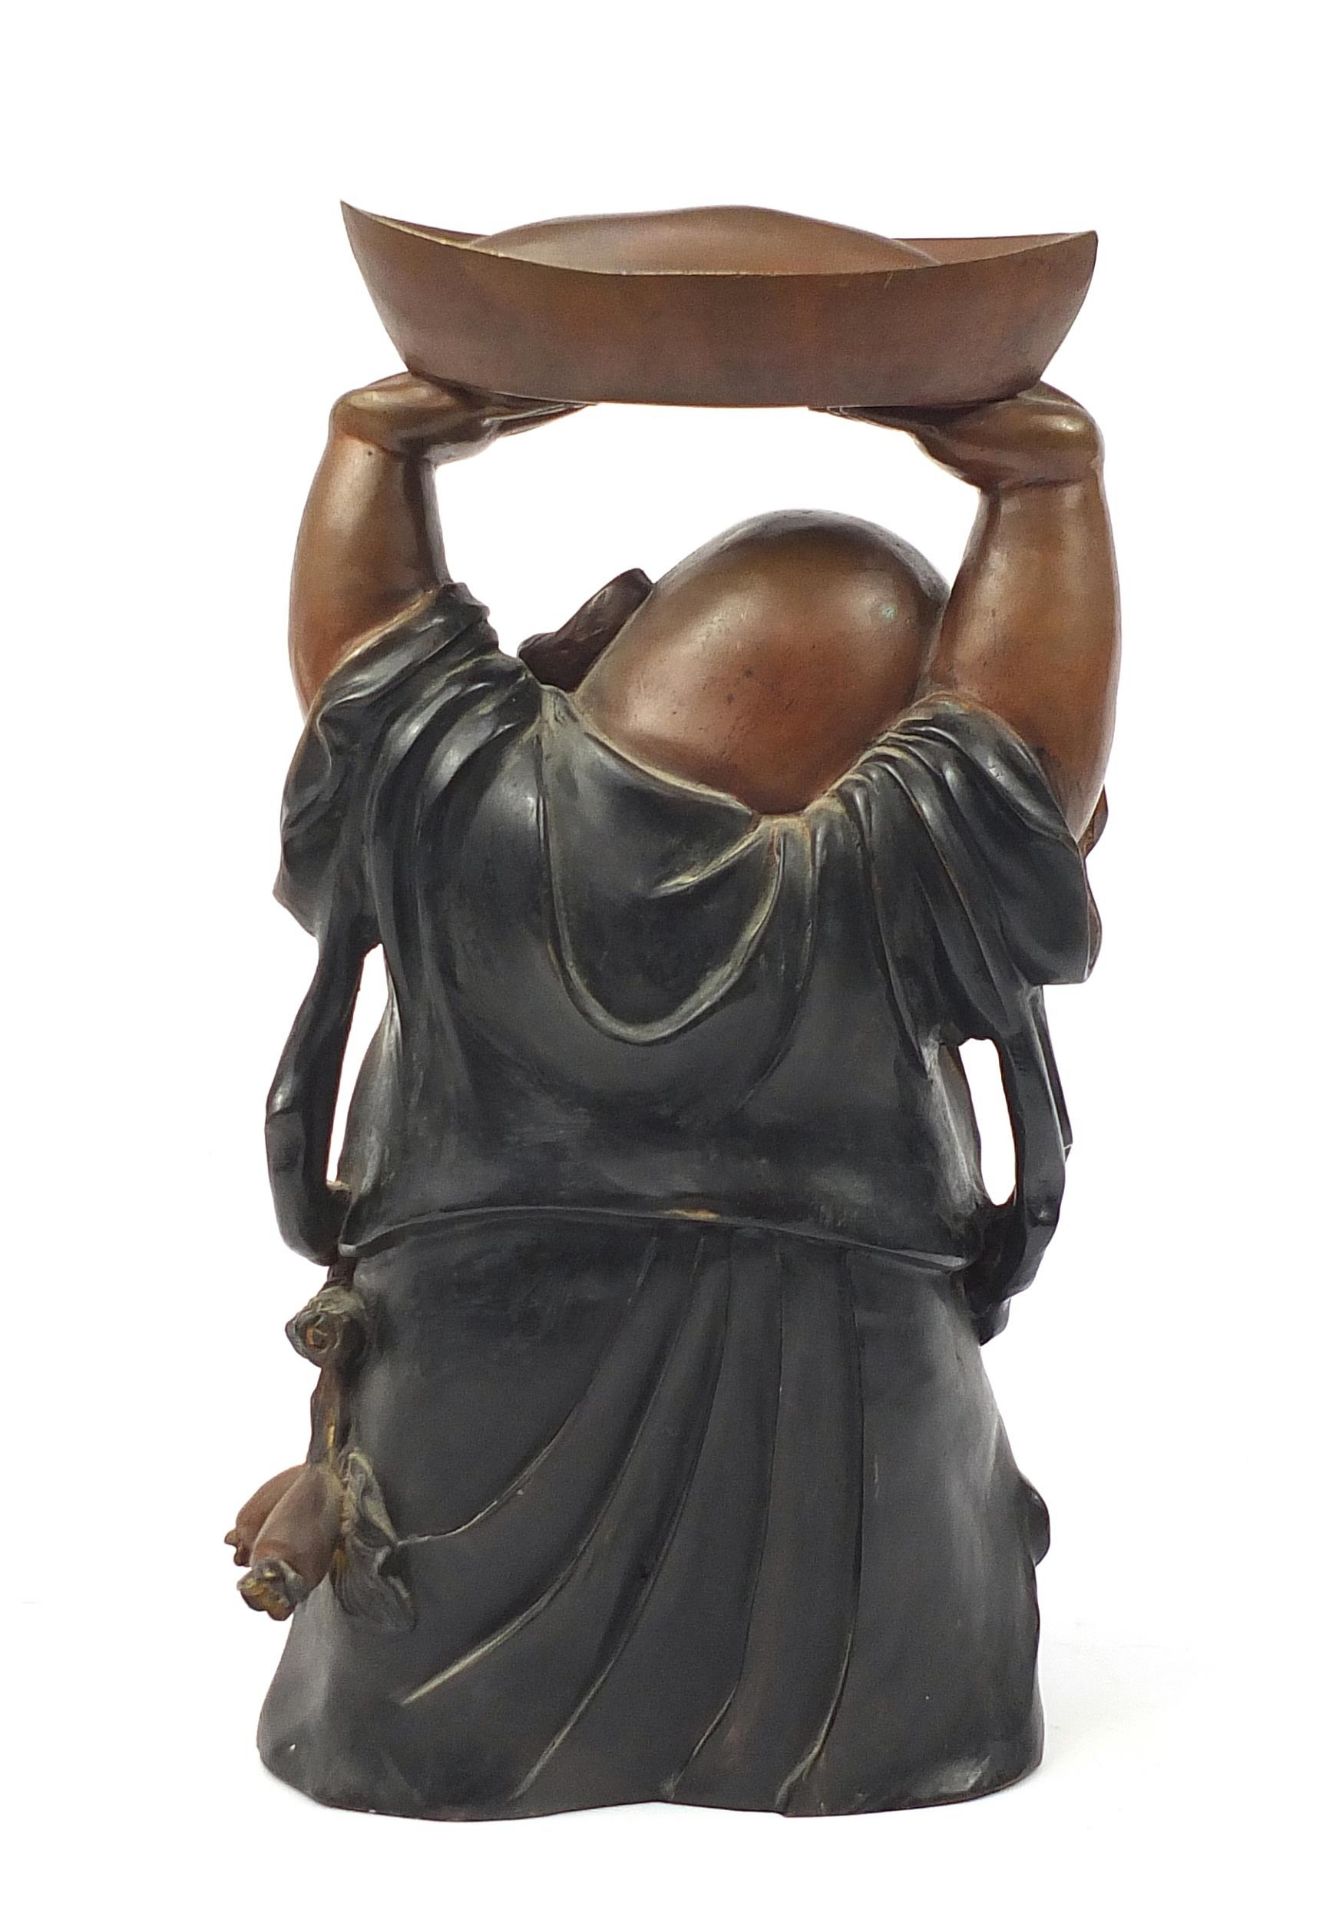 Large Chinese patinated bronze figure of Buddha with his hands above his head holding a vessel, 48cm - Image 3 of 6